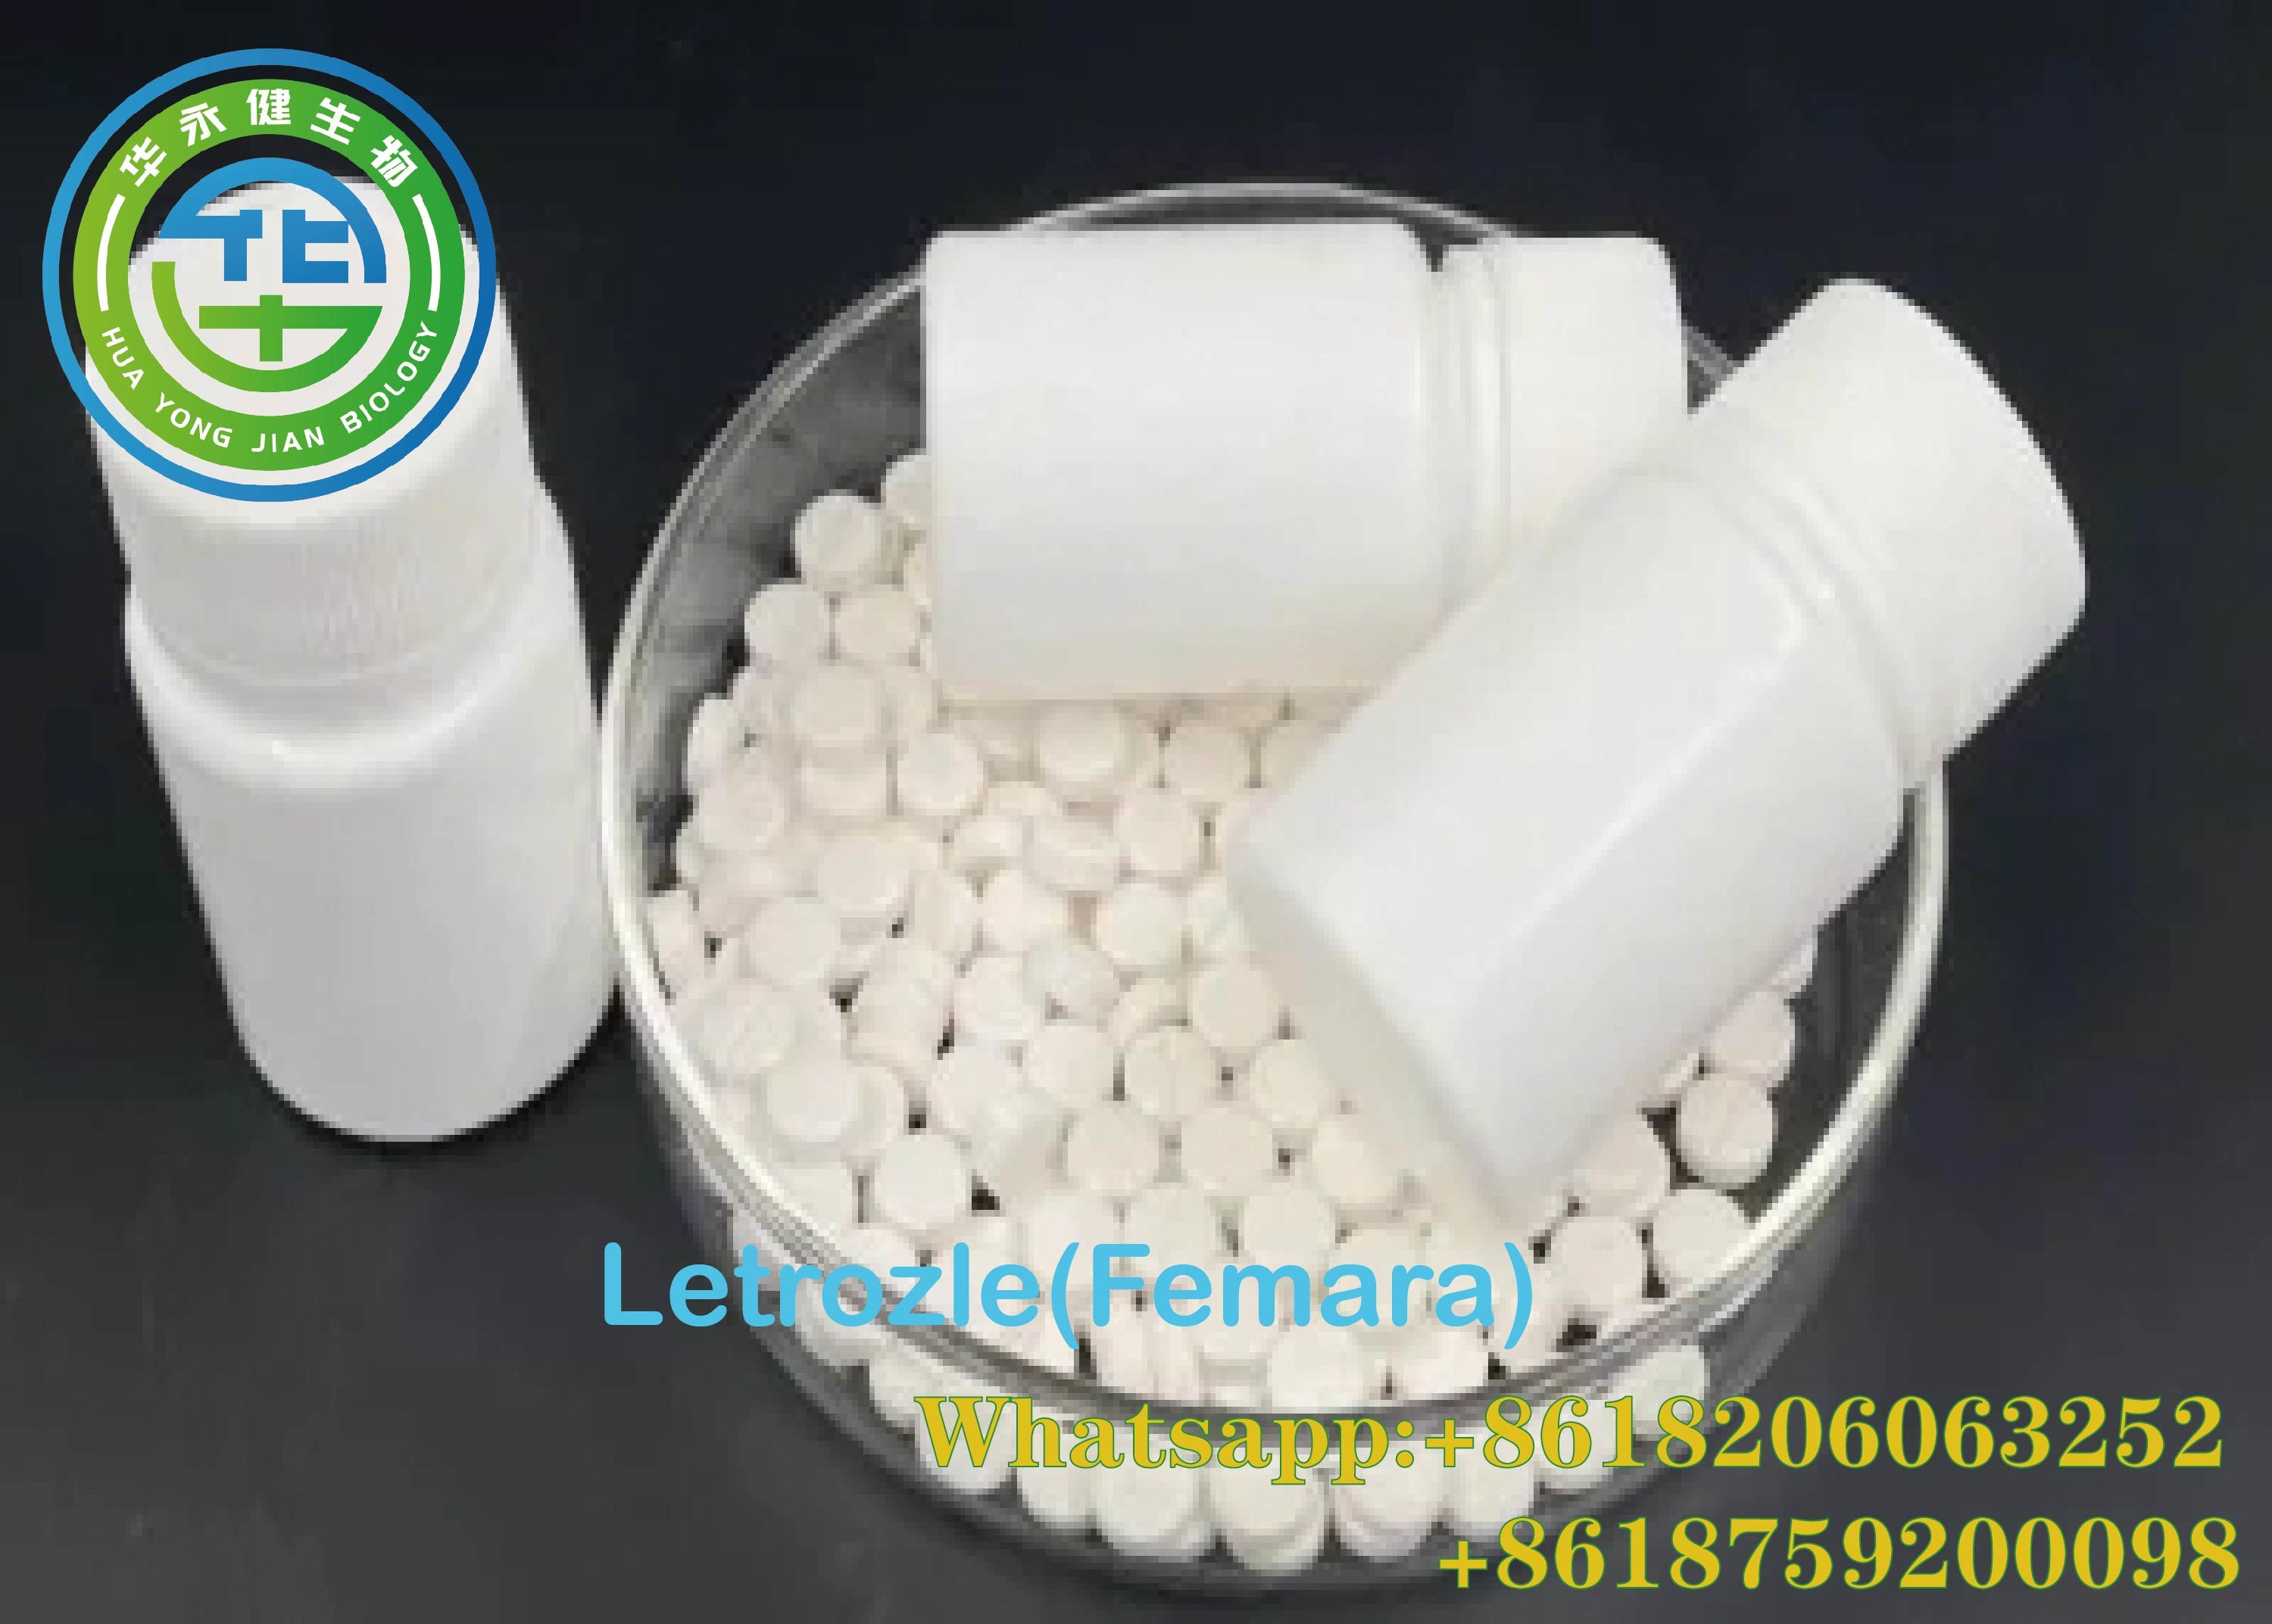 Wholesale Letrozole Tablets Steroids Bodybuilding cycle 2.5mgx100 Bottle Femara CAS 112809-51-5 from china suppliers